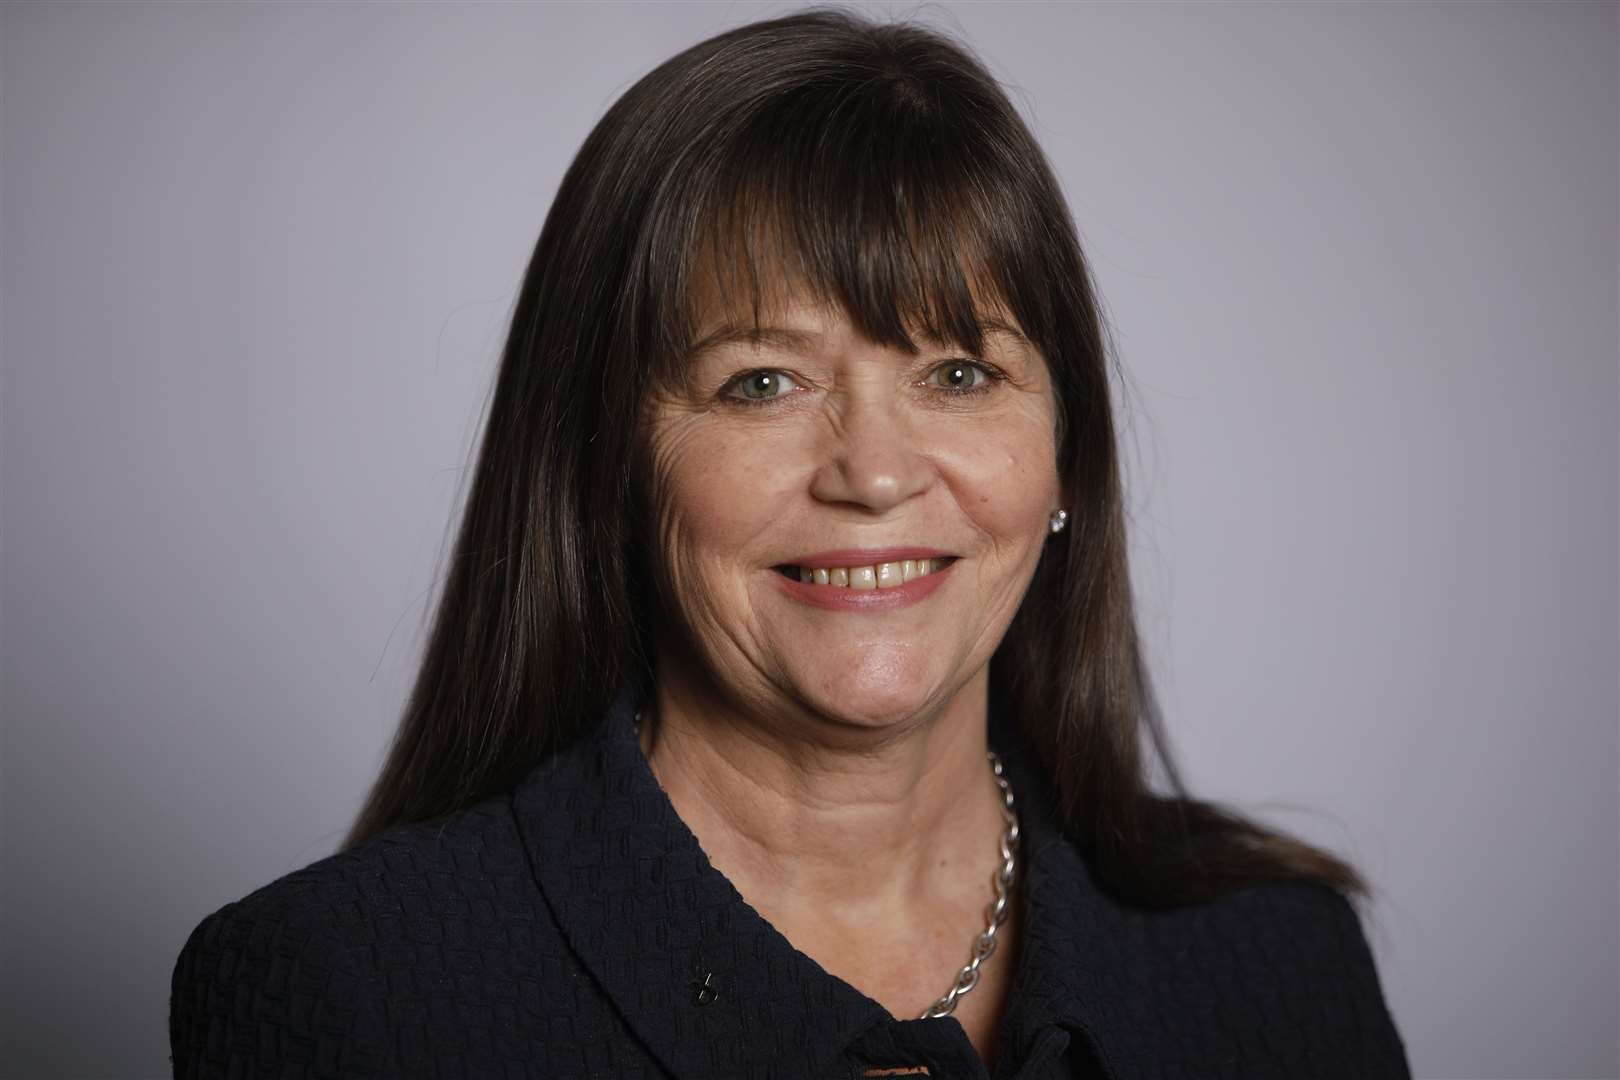 Clare Haughey MSP, Convener of the Health, Social Care and Sport Committee